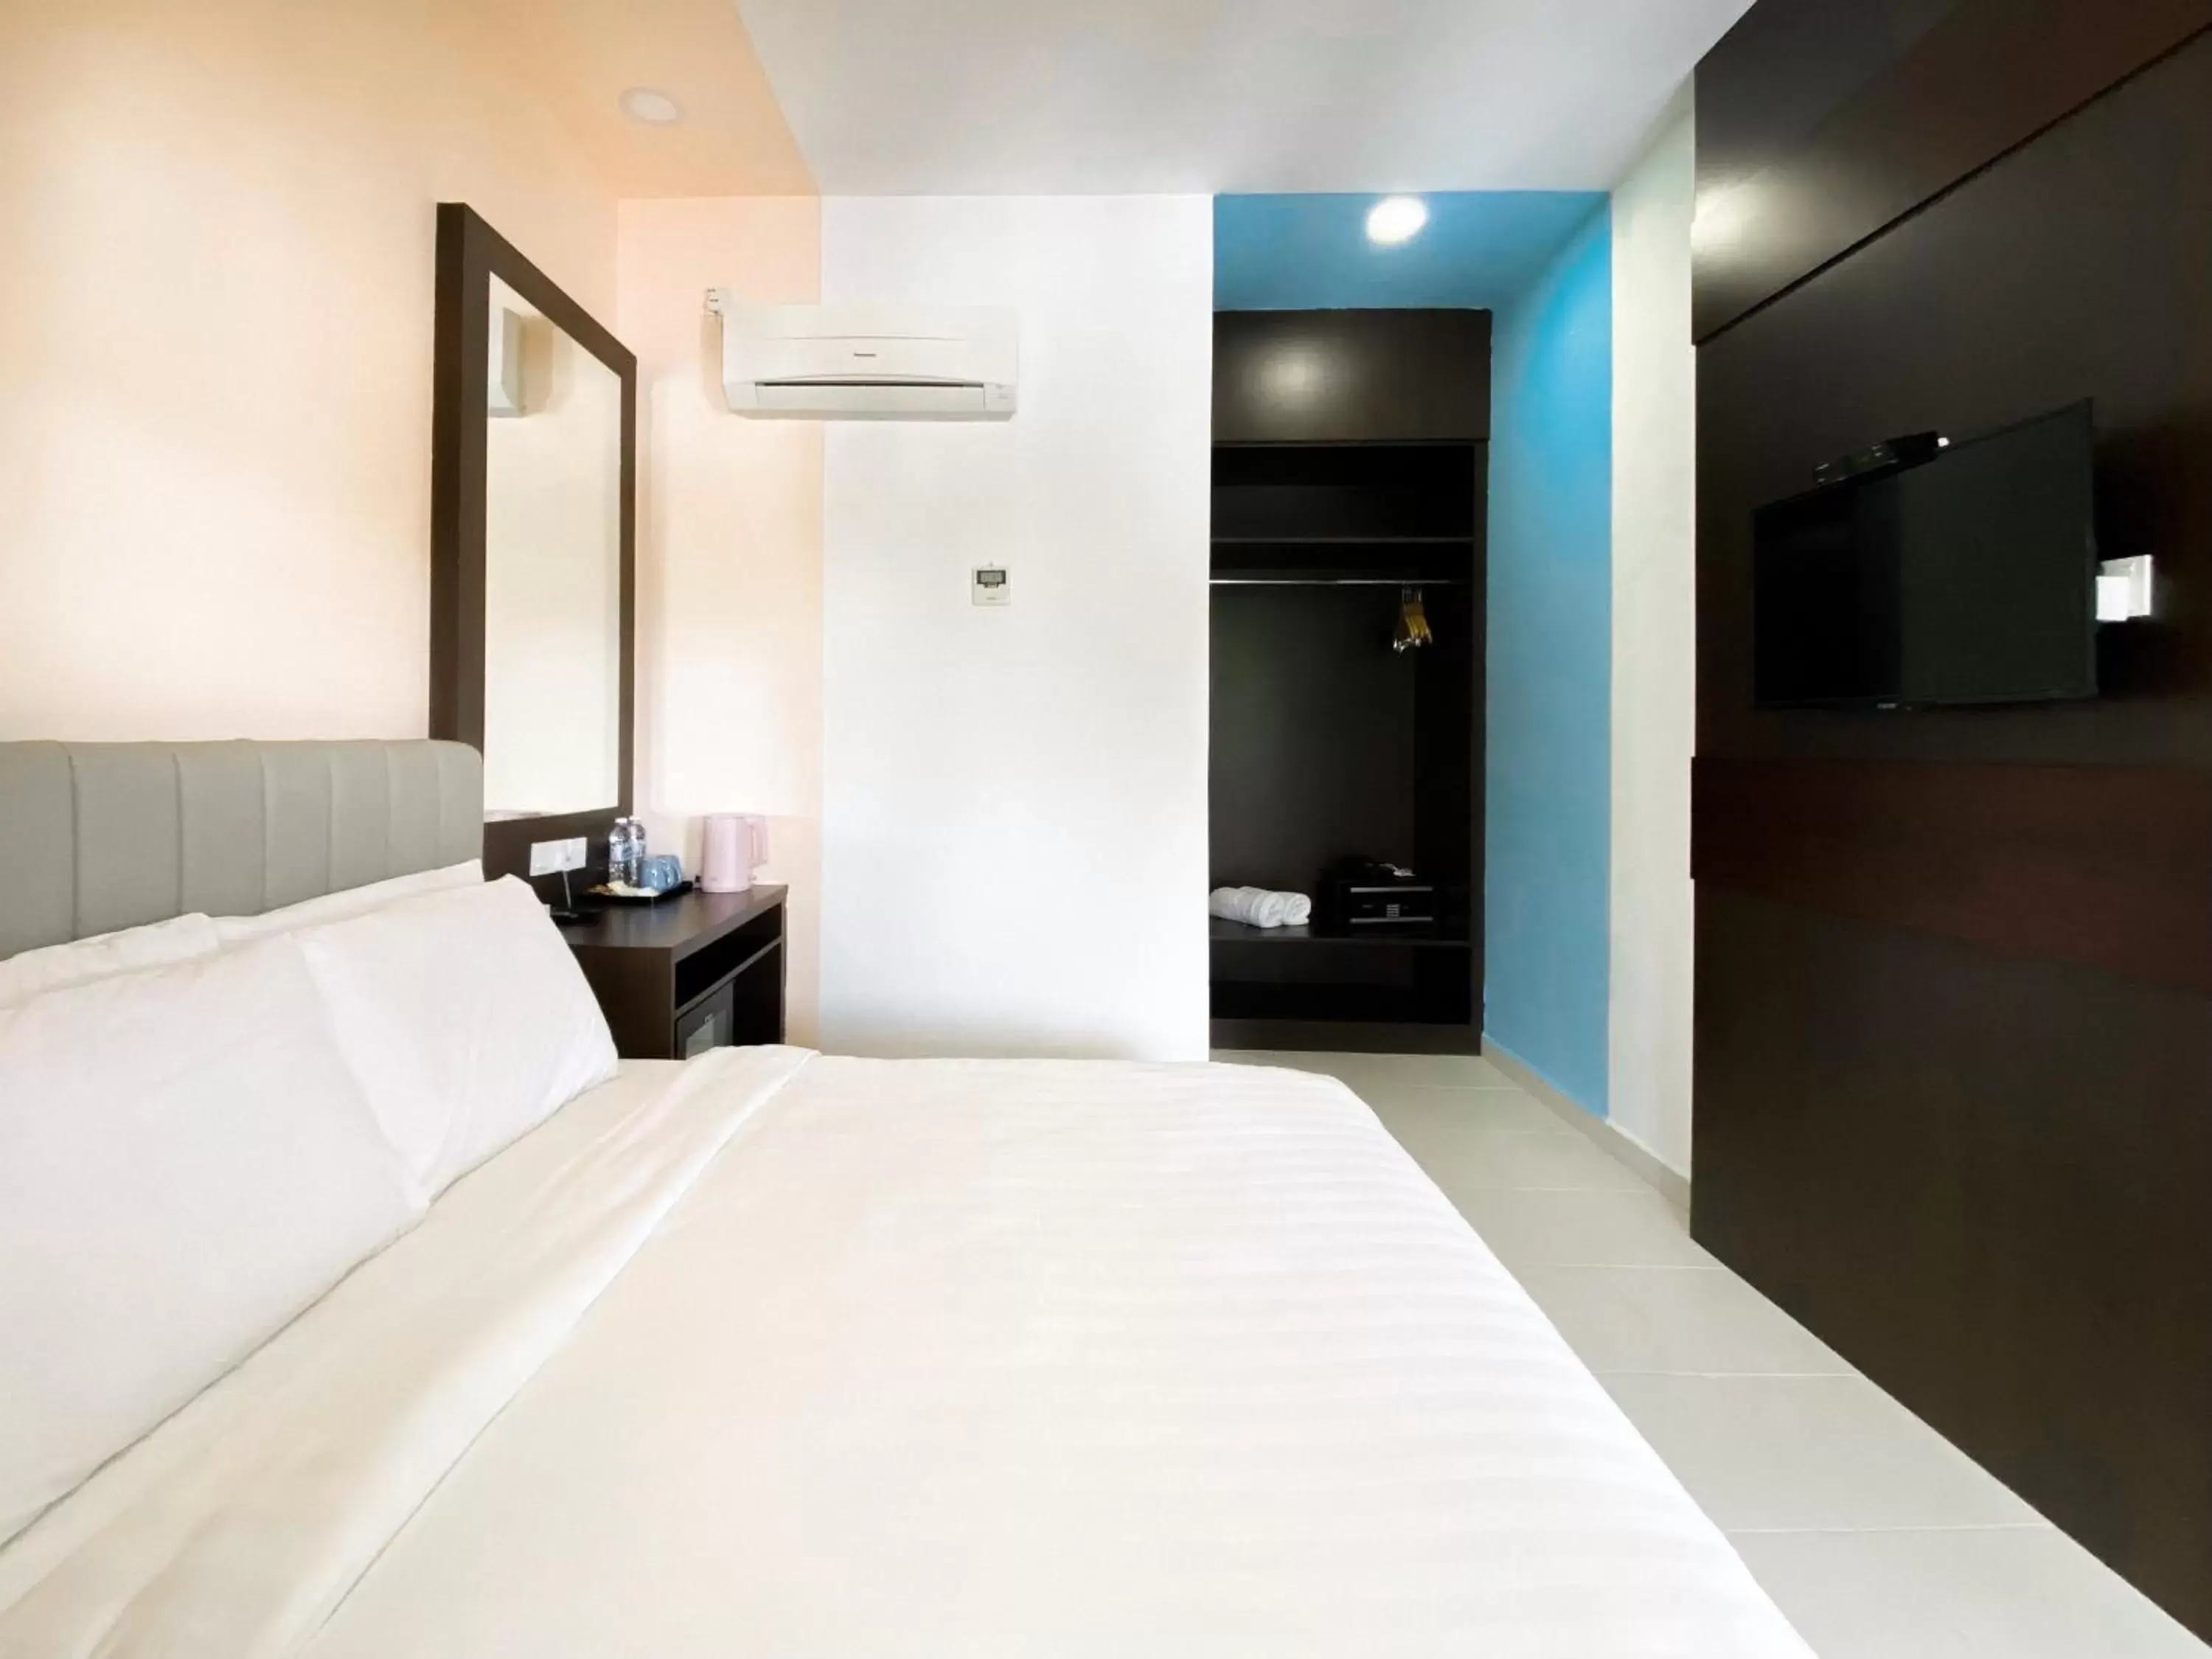 Queen Room in The Concept Hotel Langkawi